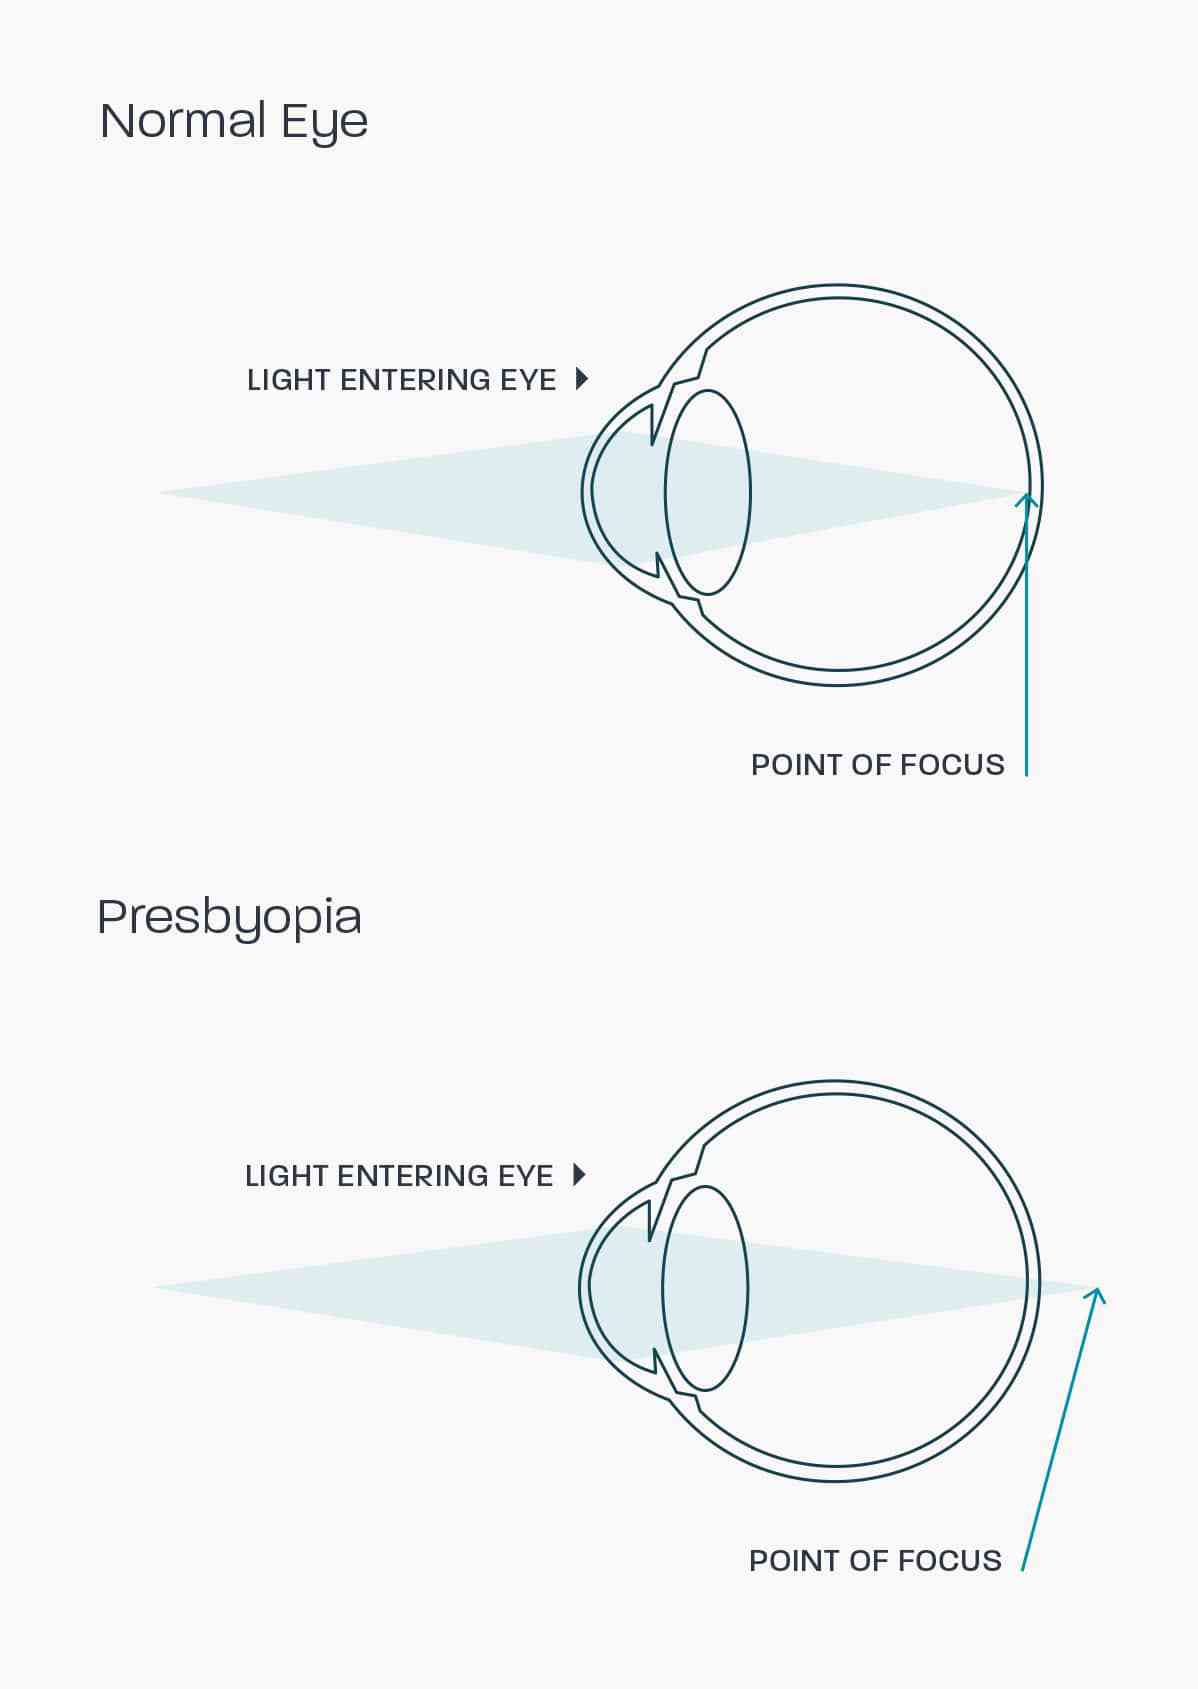 A graphic showing how presbyopia affects the eye